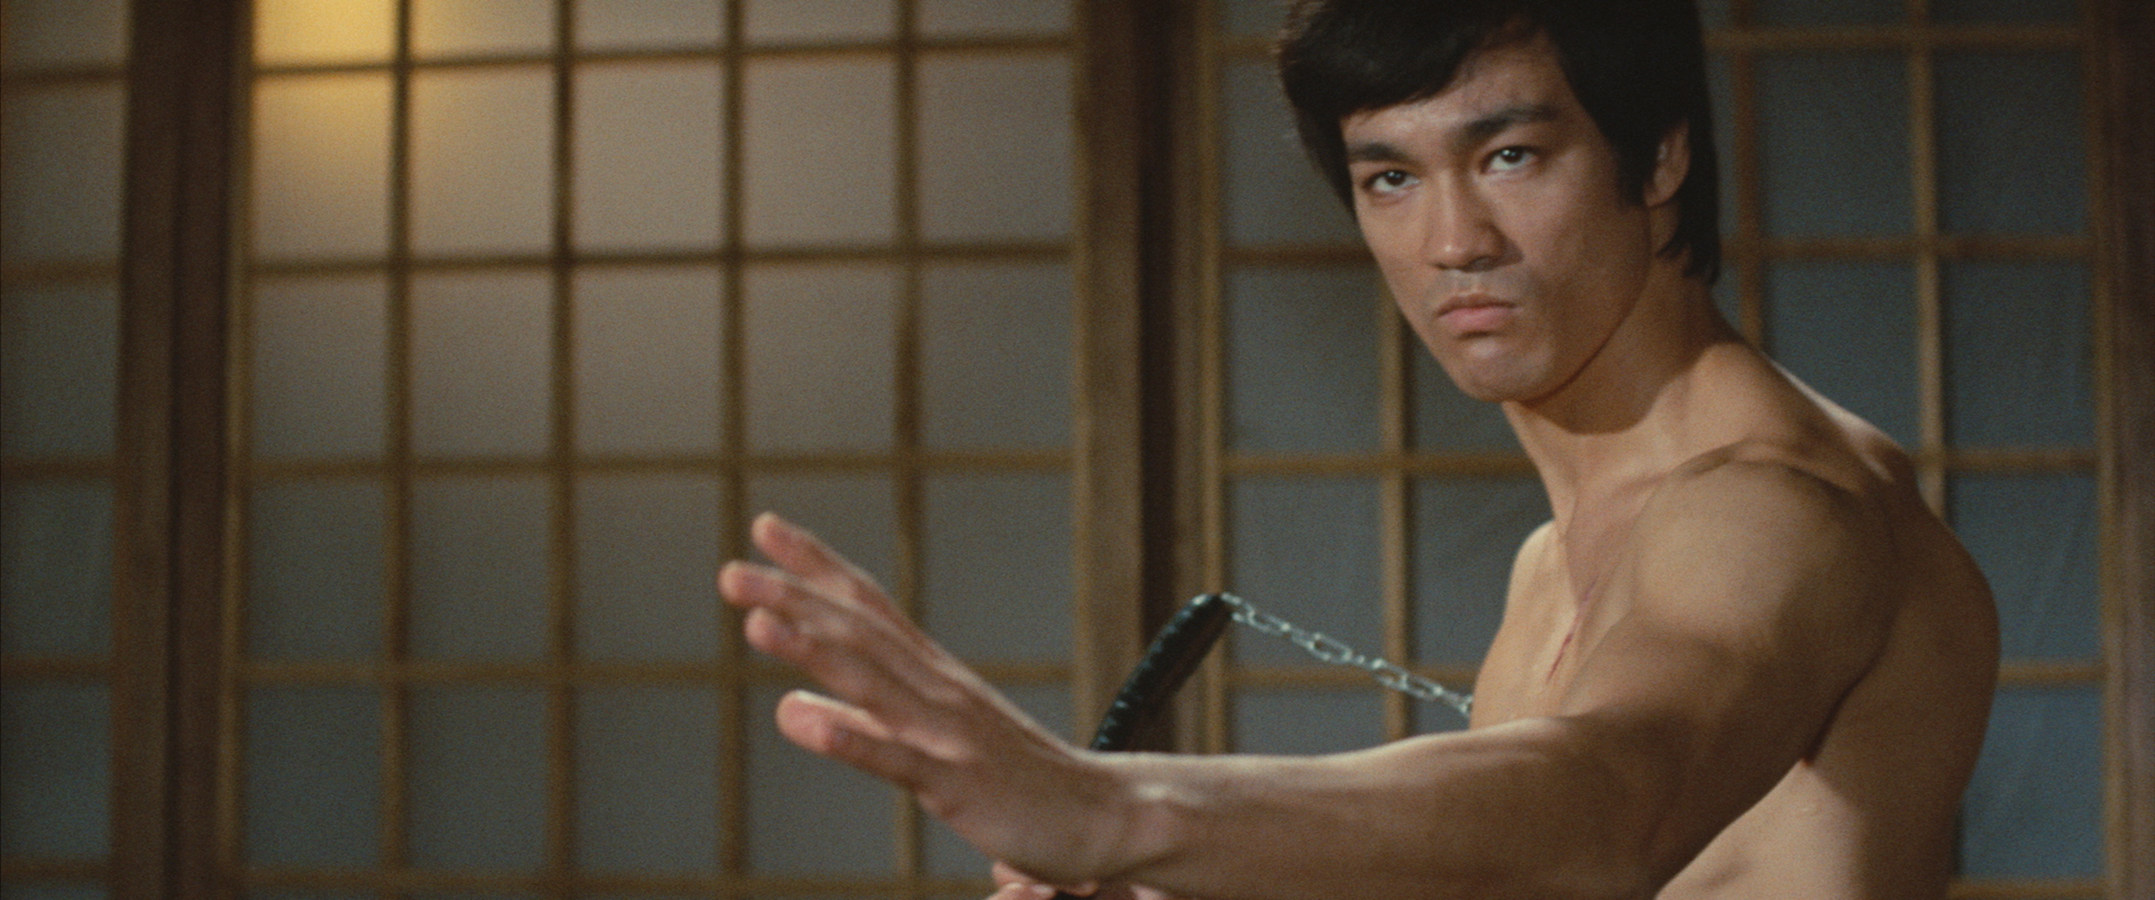 Bruce Lee is seen in a still from Fist of Fury. Photo: Criterion Collection.